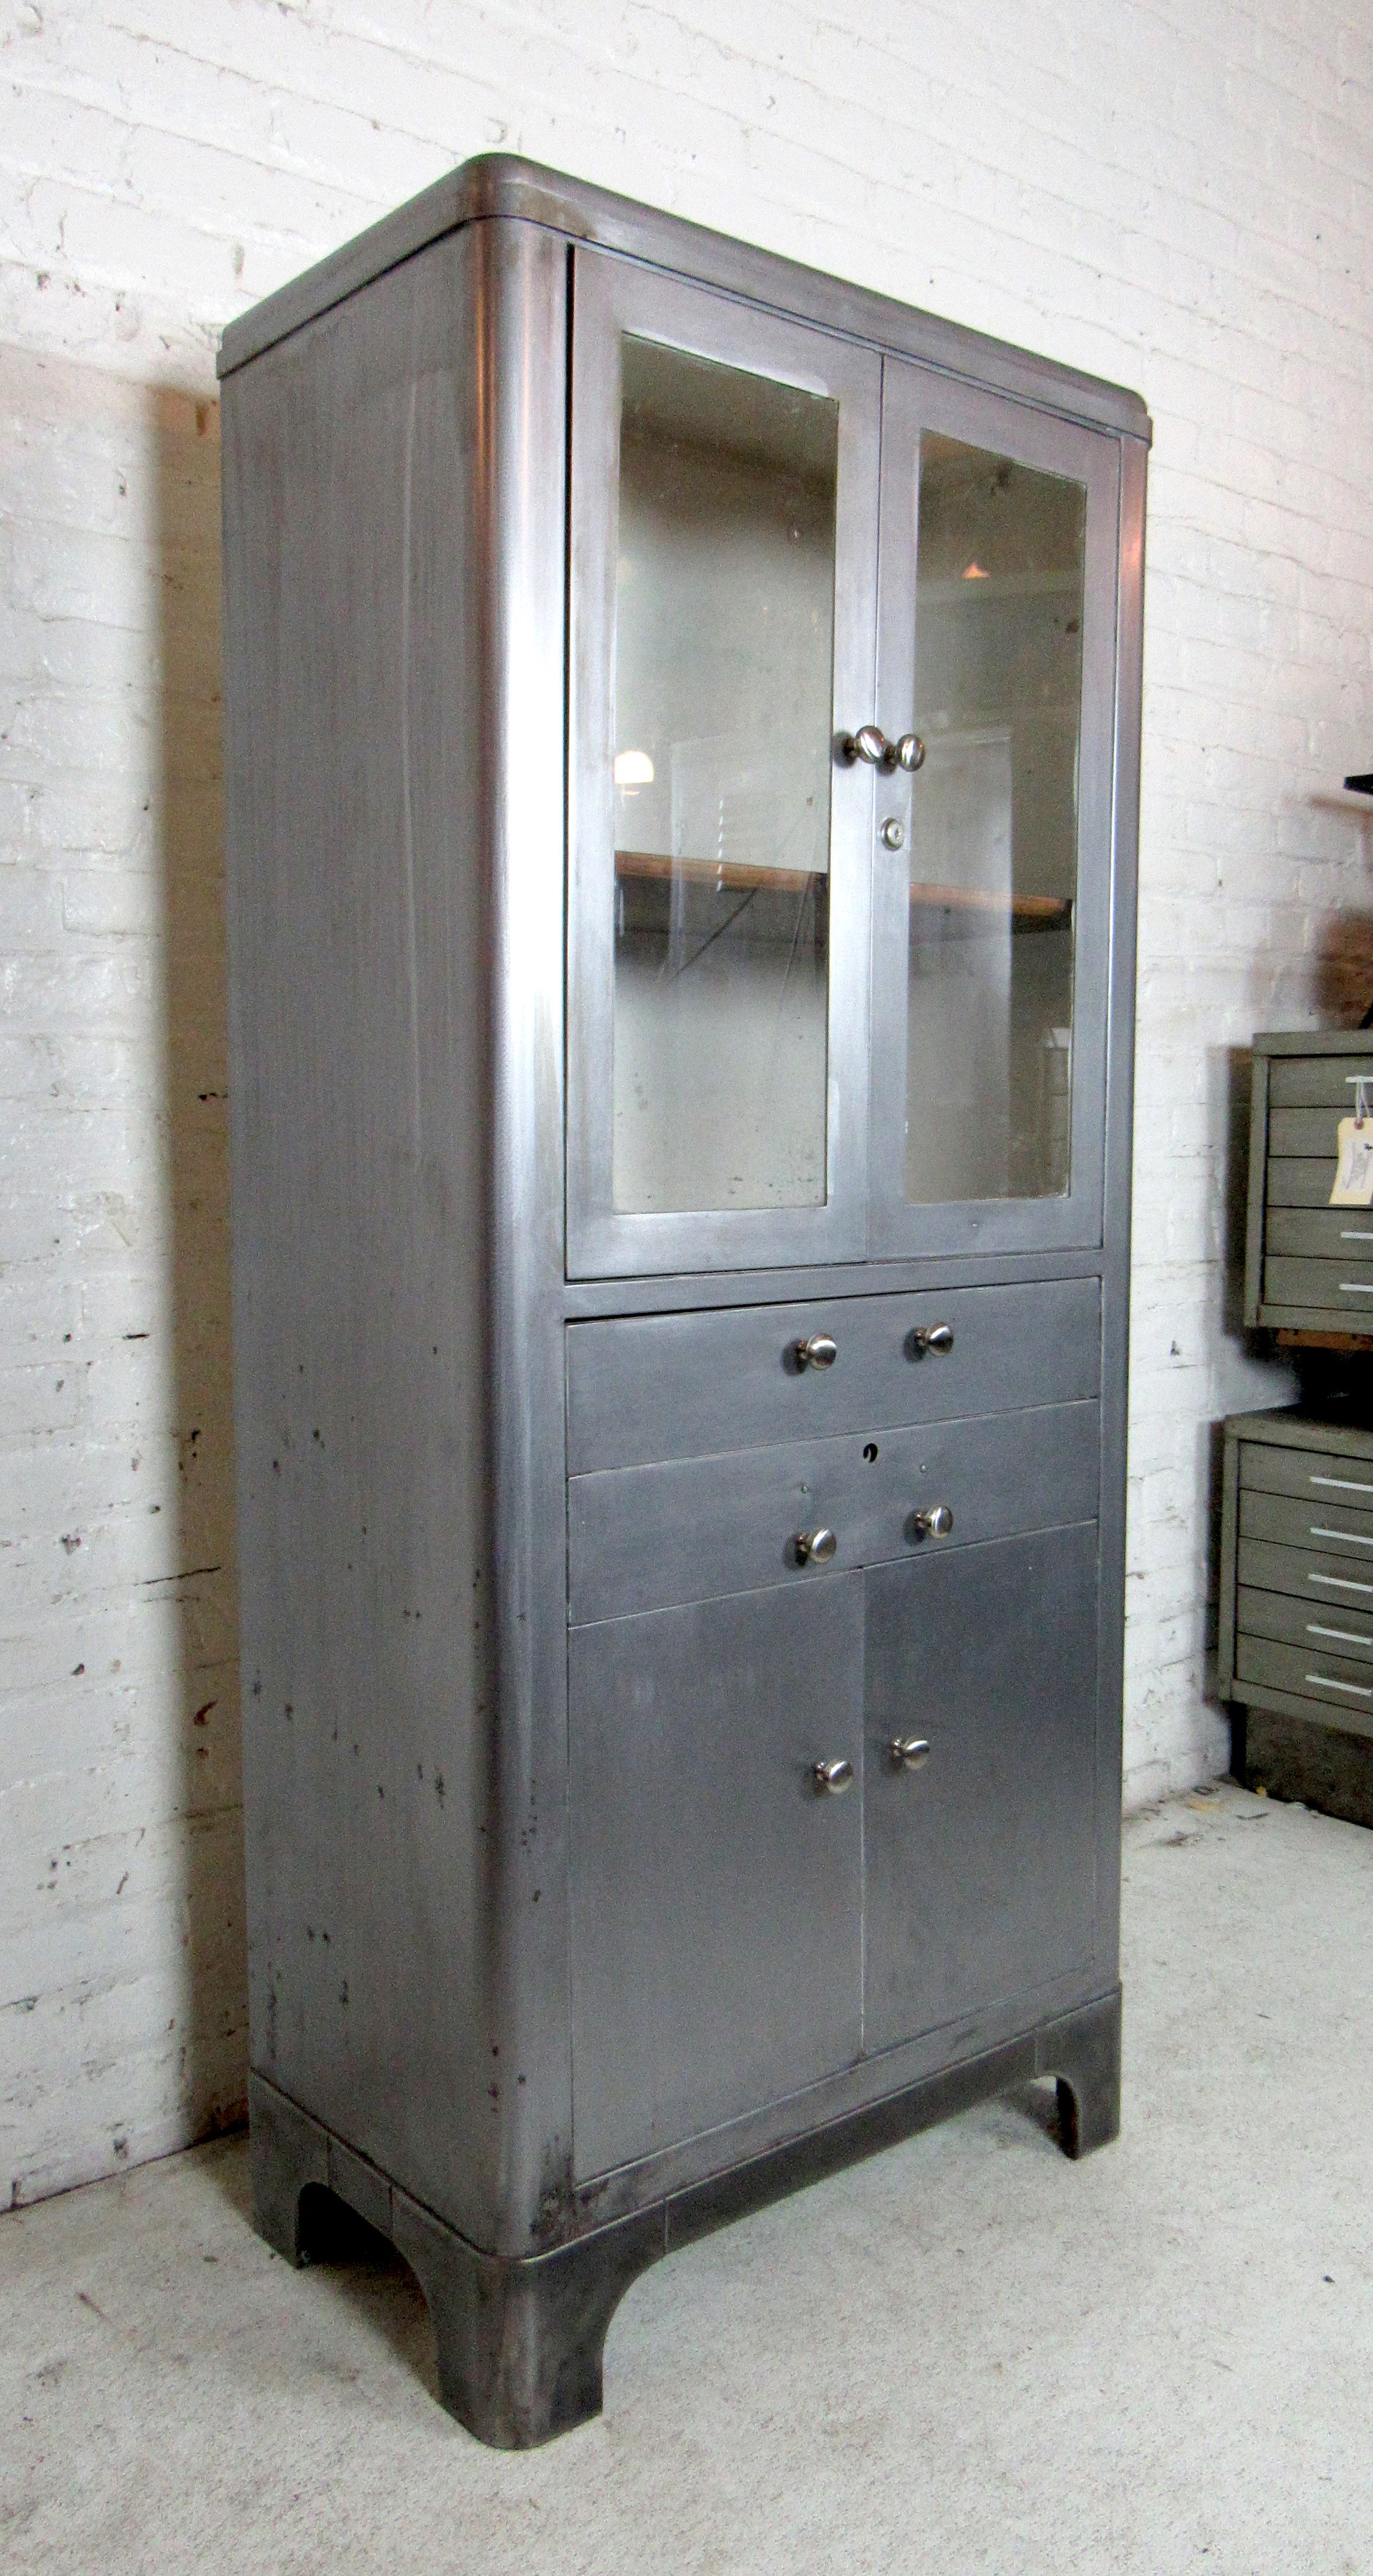 Vintage metal Doctor's cabinet, refinished in an industrial finish. Striking bare metal finish with glass windows and a wooden shelf.

(Please confirm item location - NY or NJ - with dealer).